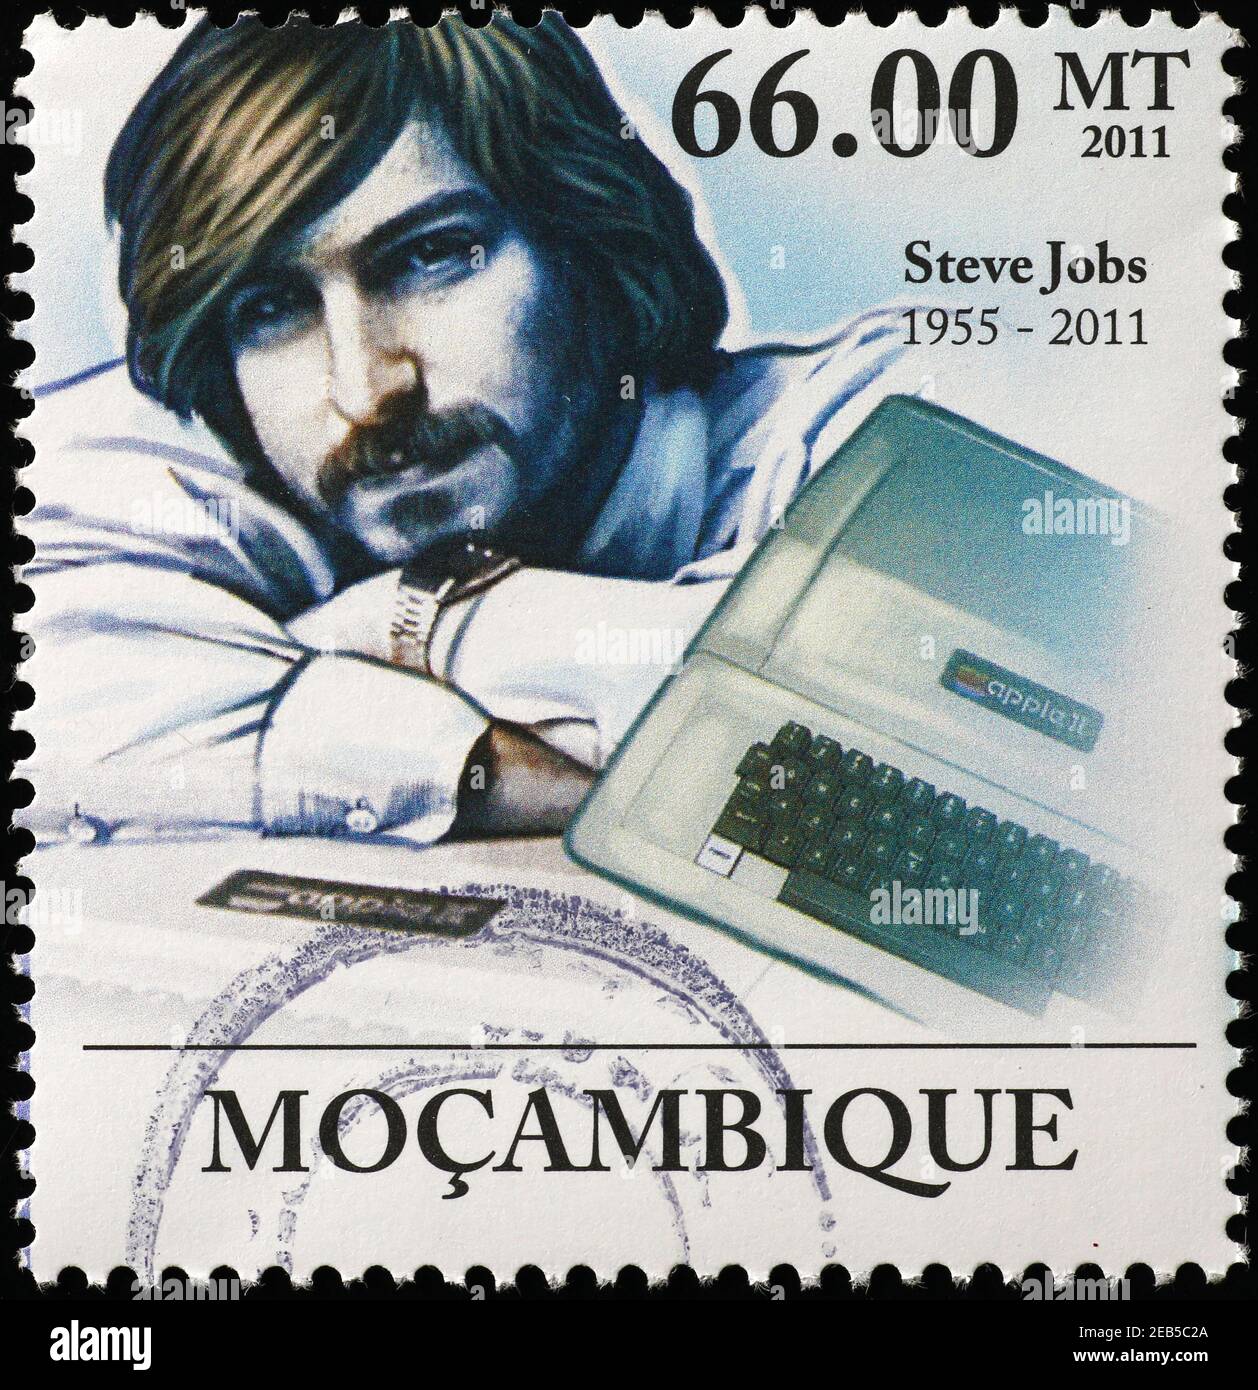 Young Steve Jobs with an Apple computer on postage stamp Stock Photo